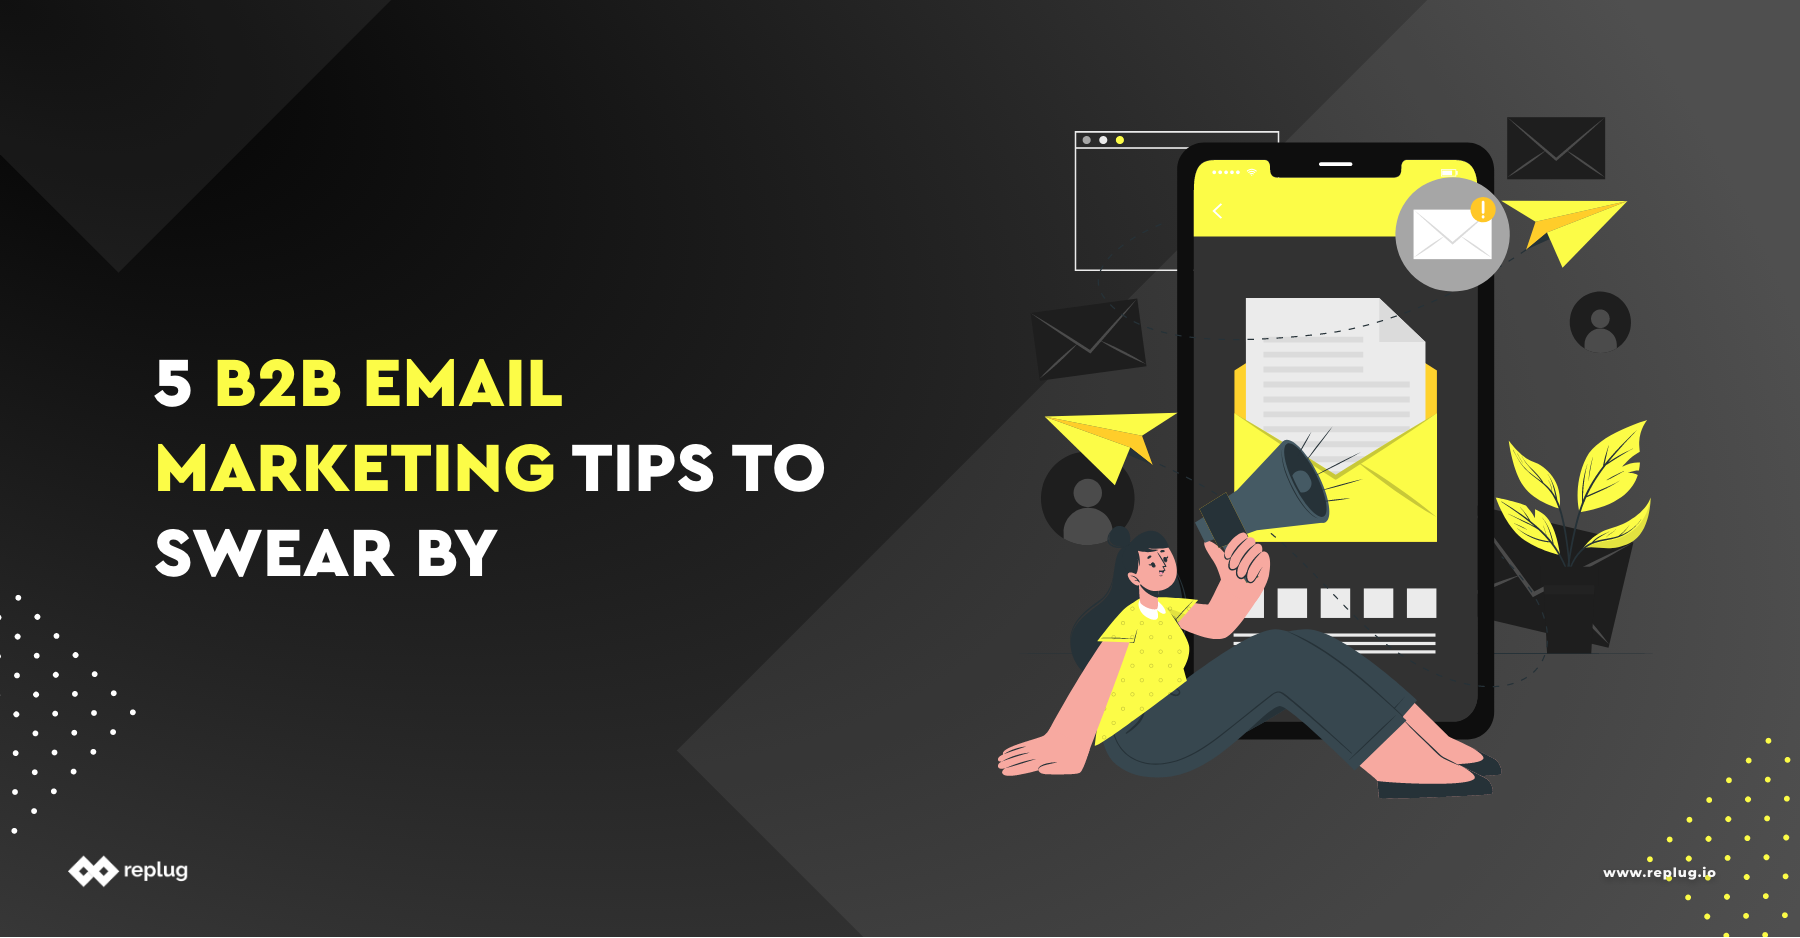 5 B2B Email Marketing Tips to Swear By